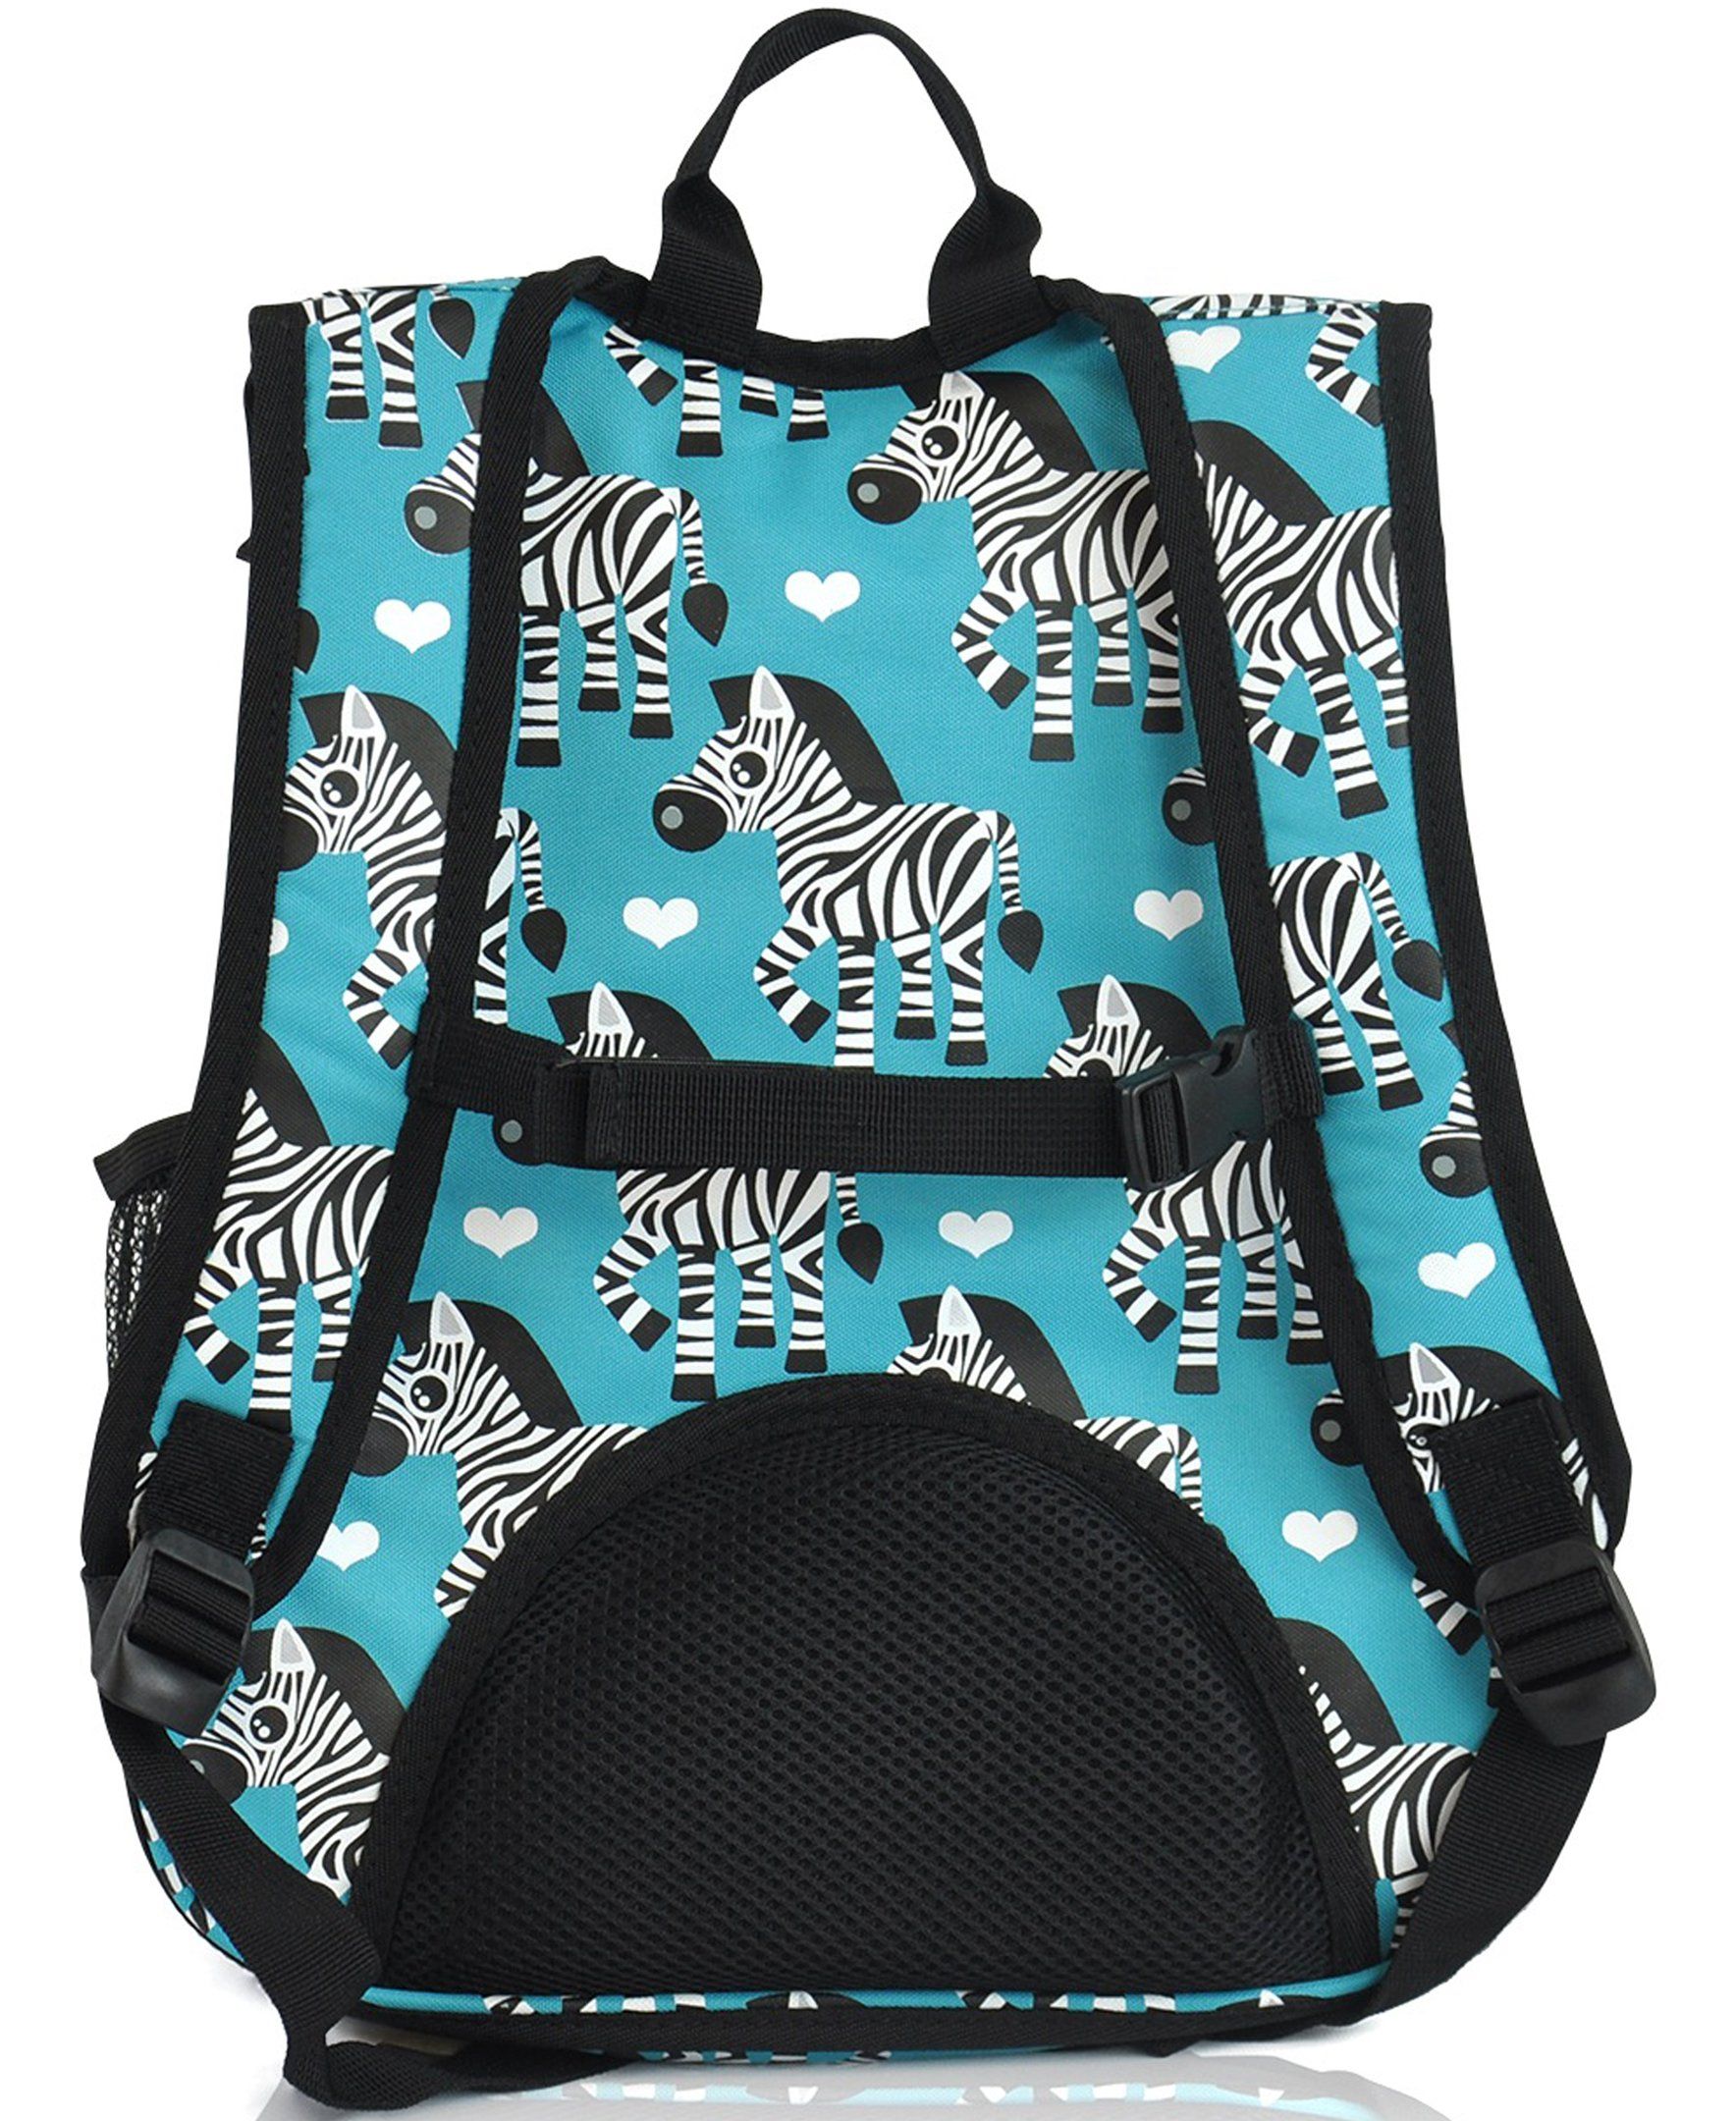 O3KCBP021 Obersee Mini Preschool All-in-One Backpack for Toddlers and Kids with integrated Insulated Cooler | Zebra - image 2 of 5